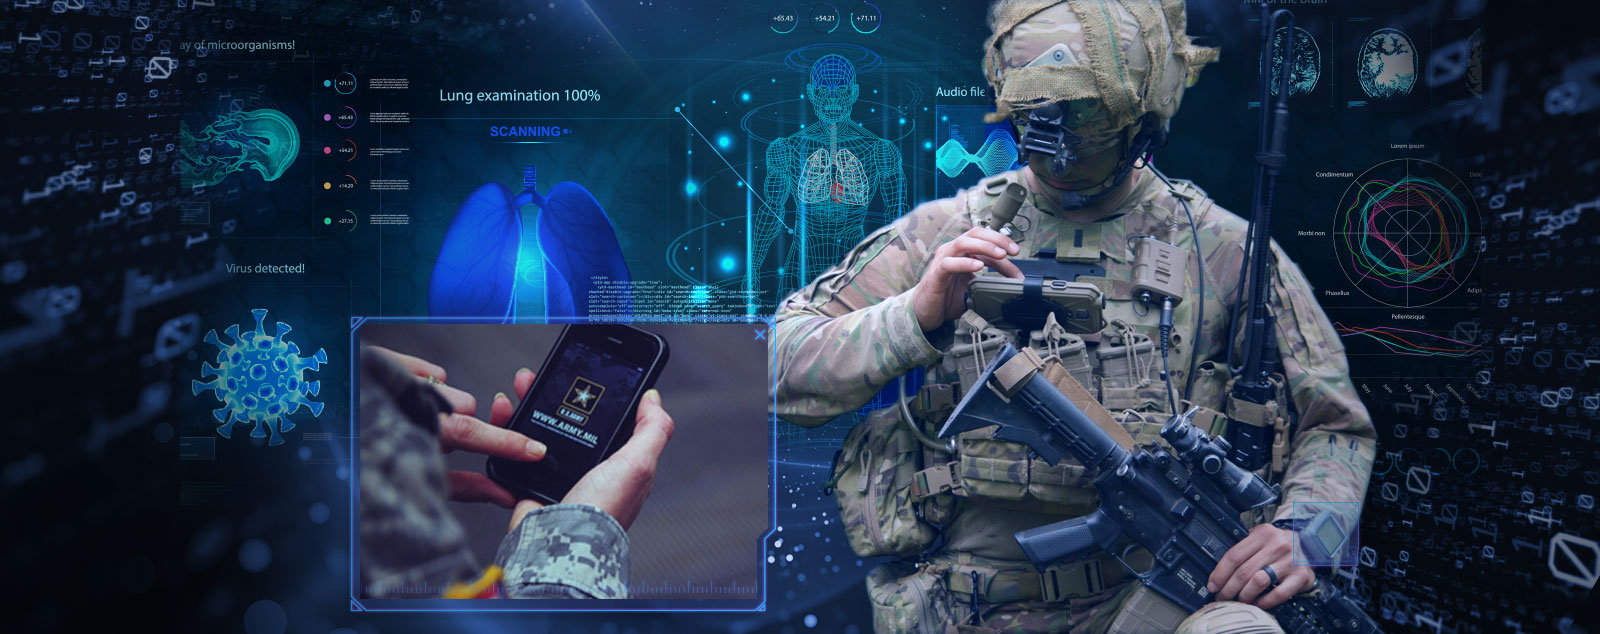 An Illustration of a U.S. Solidier using mobile devices to monitor health